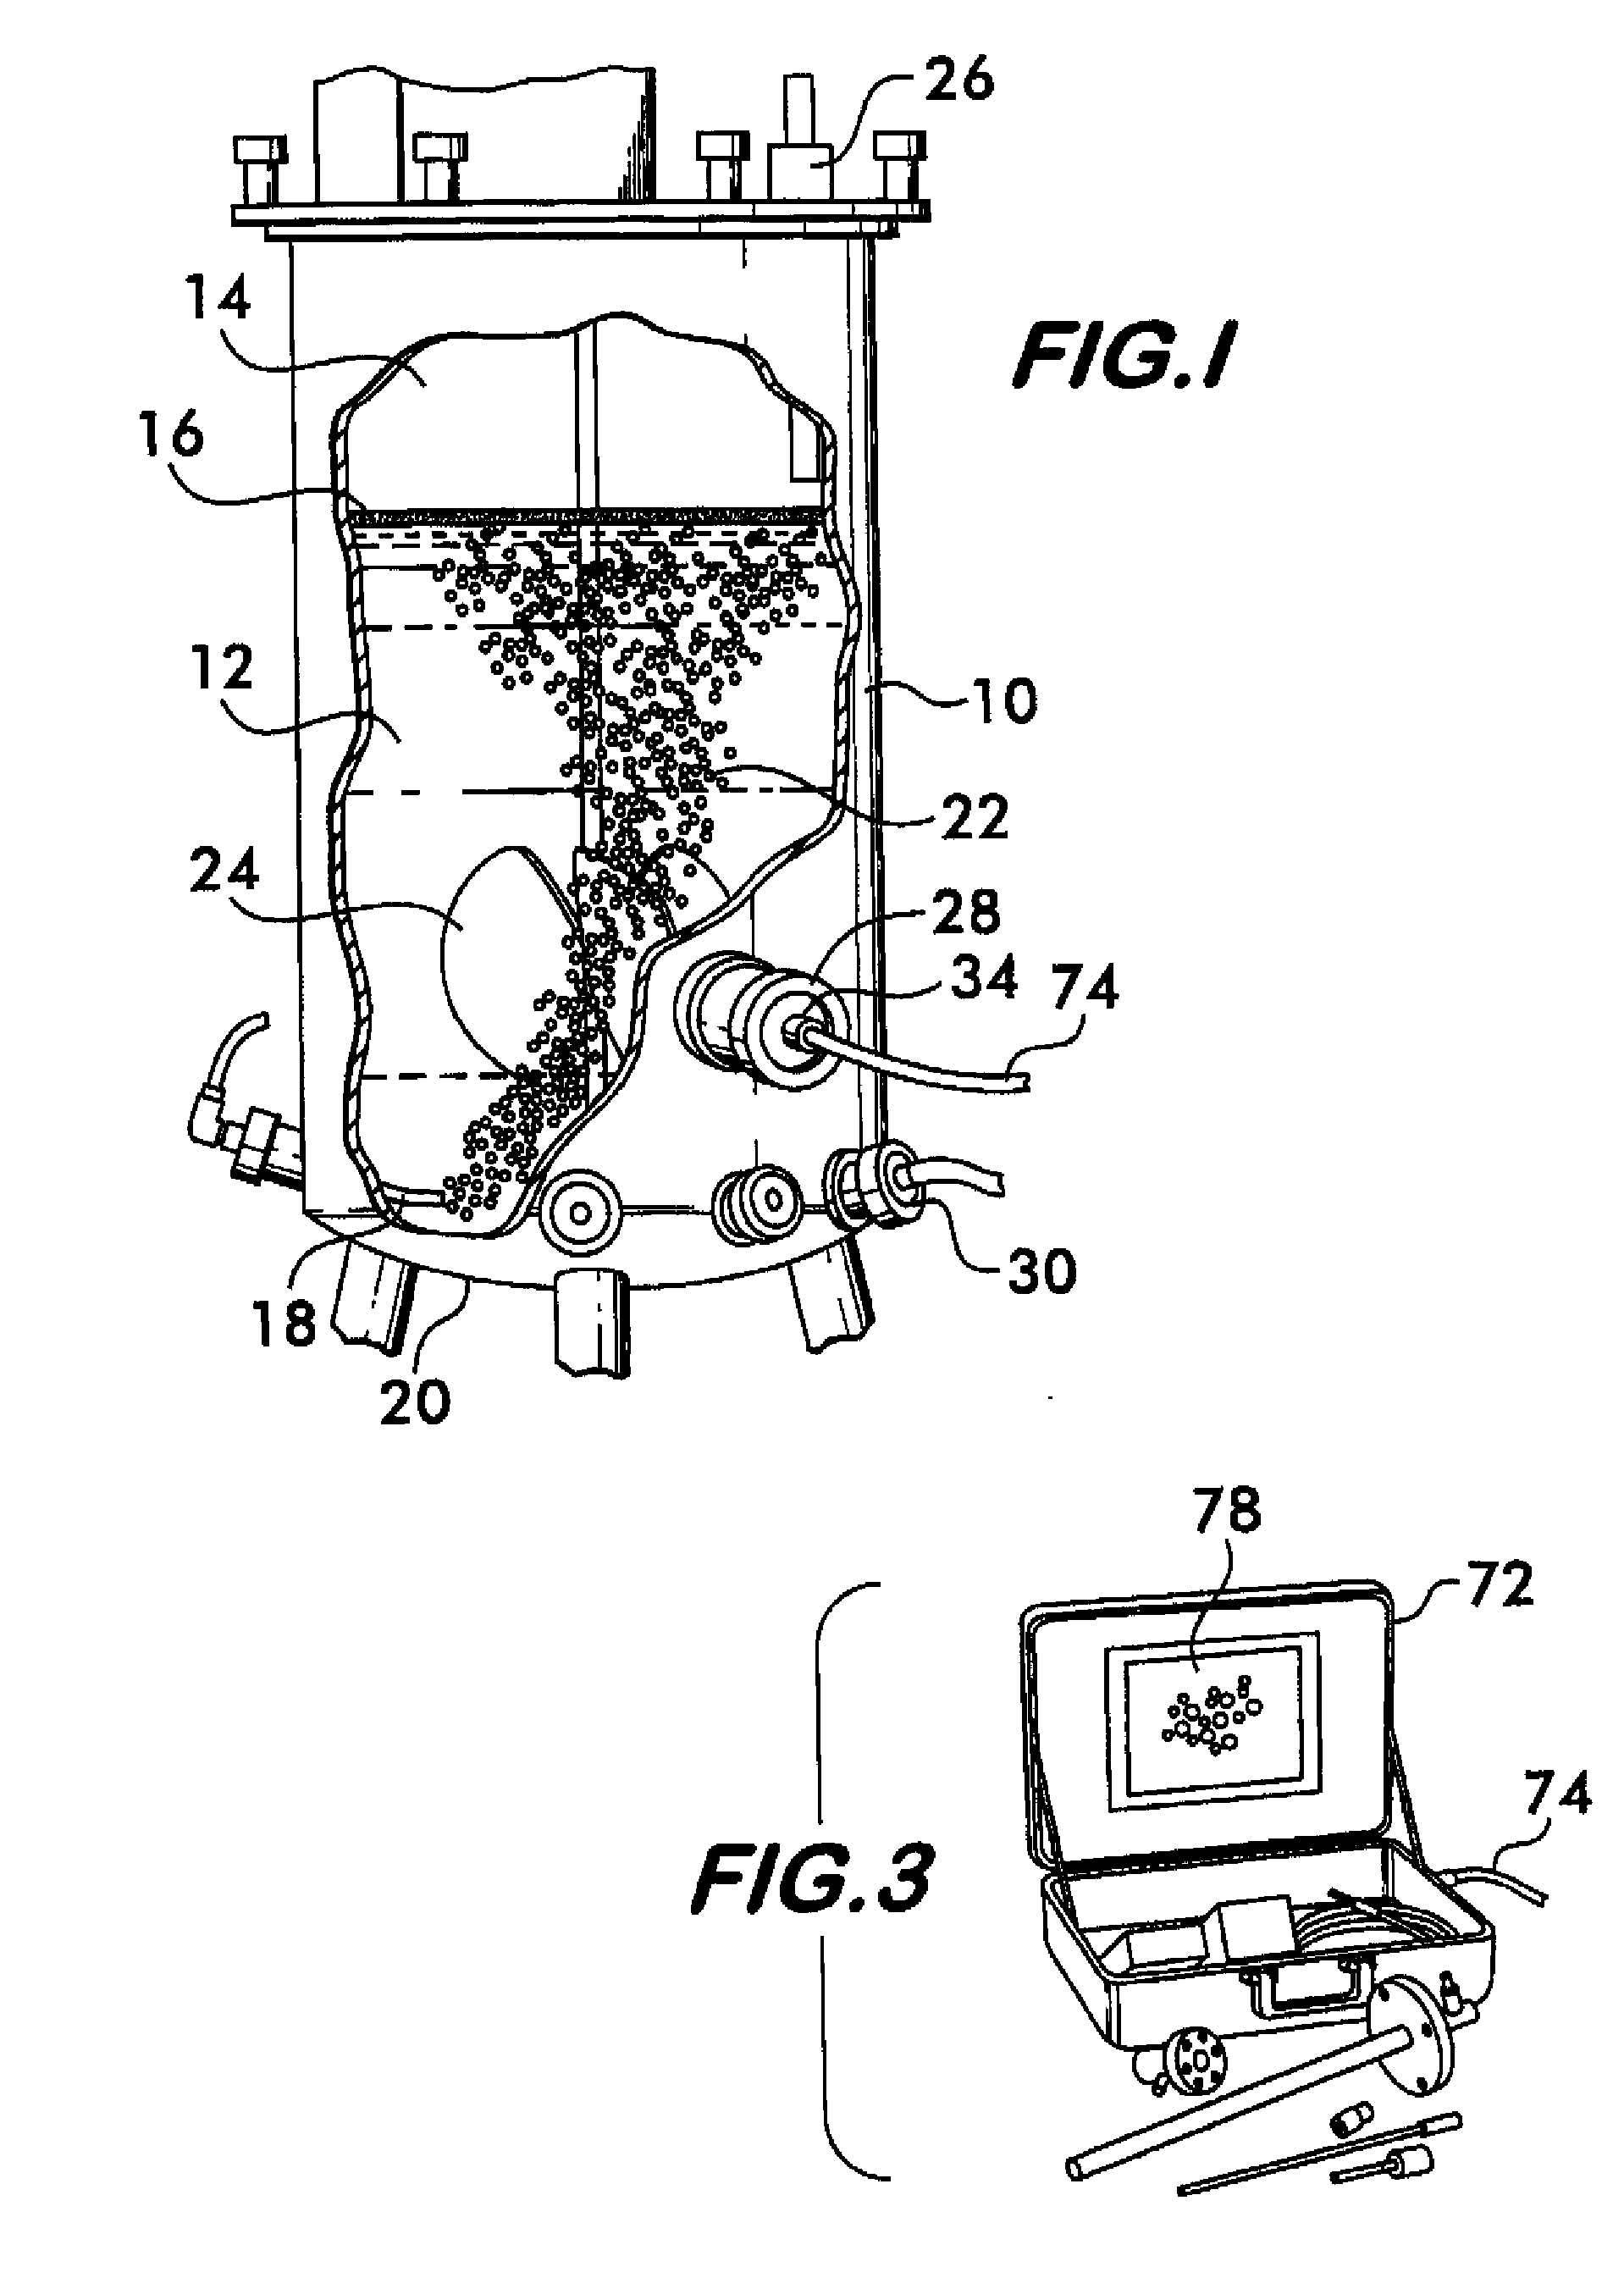 Image Recognition and Analysis System and Software